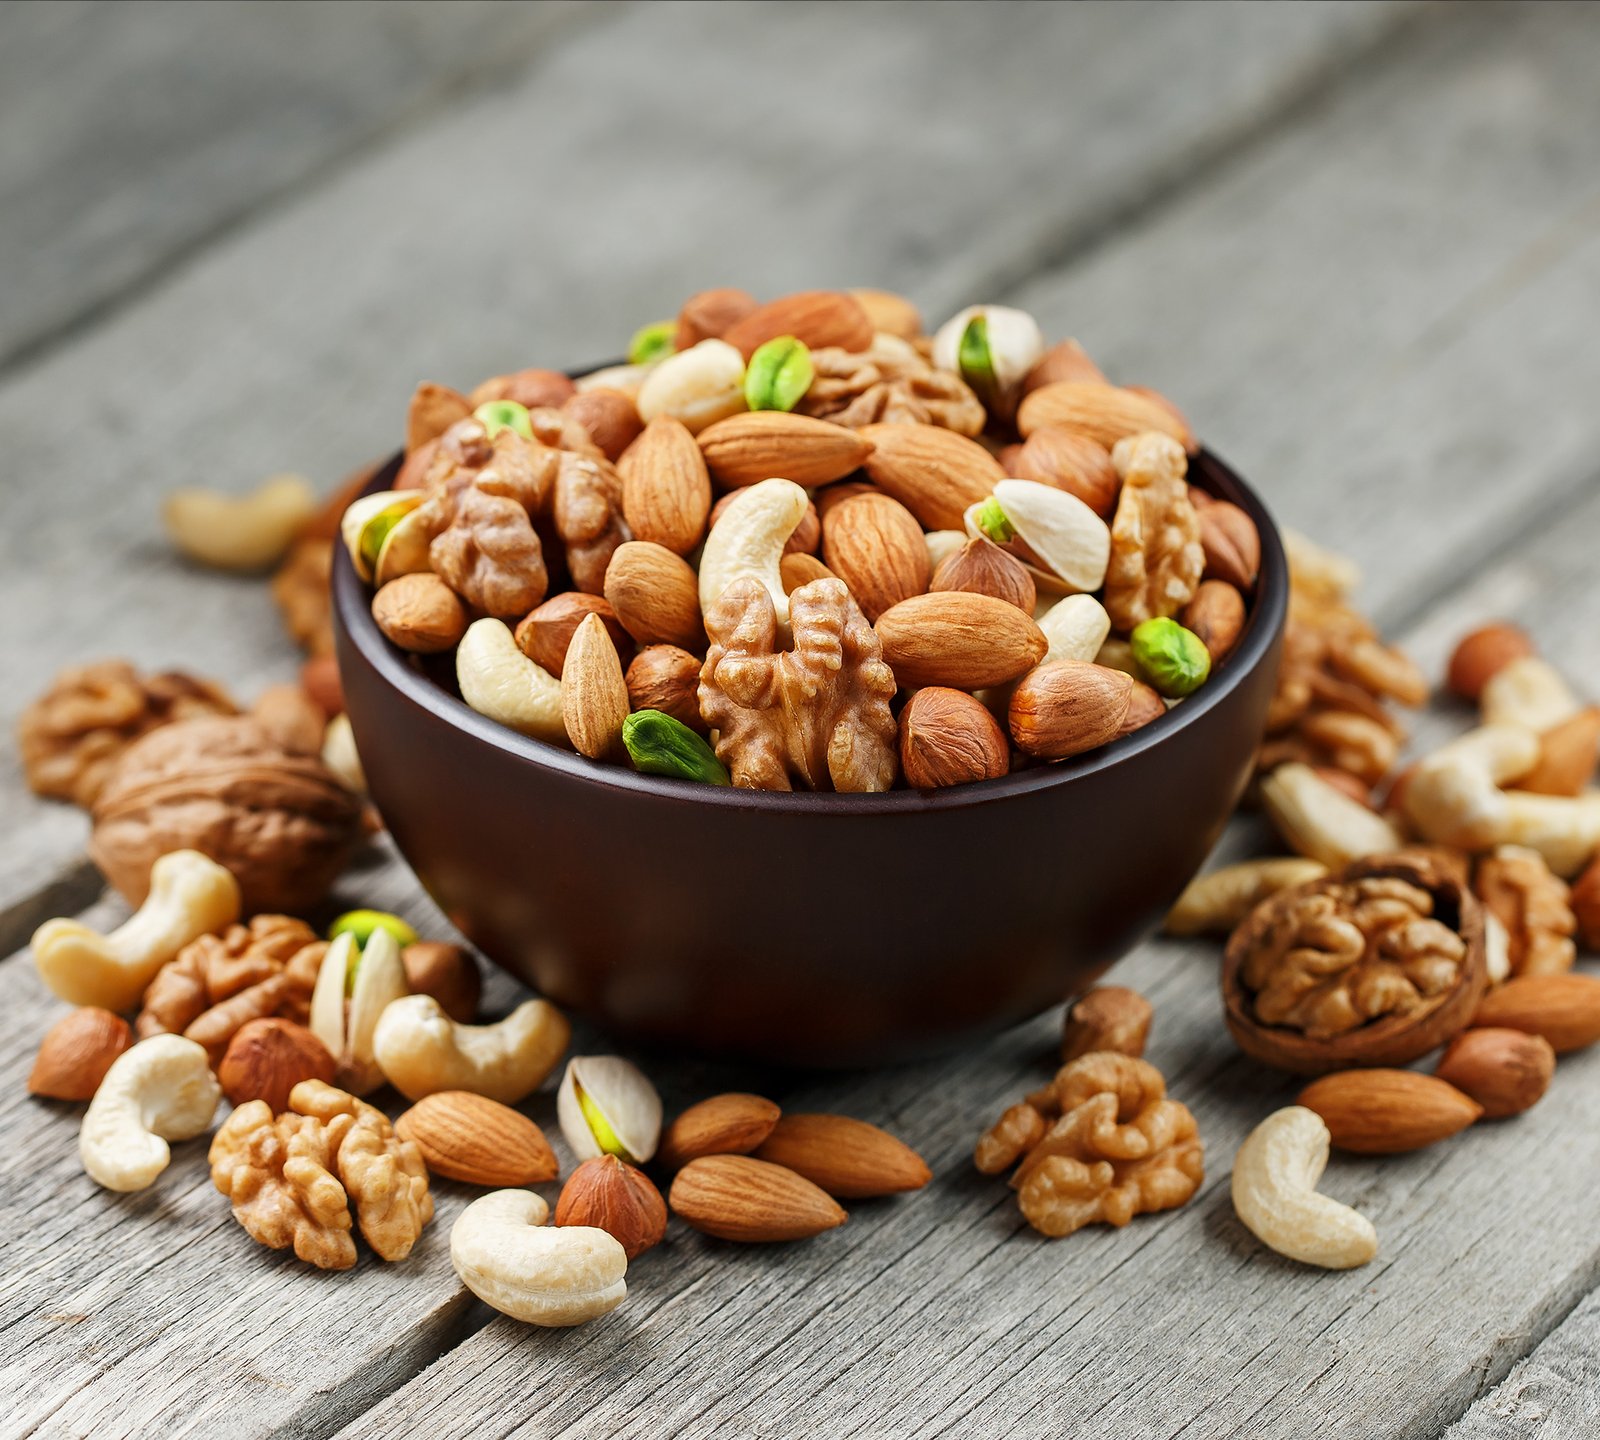 Dry fruits & Nuts